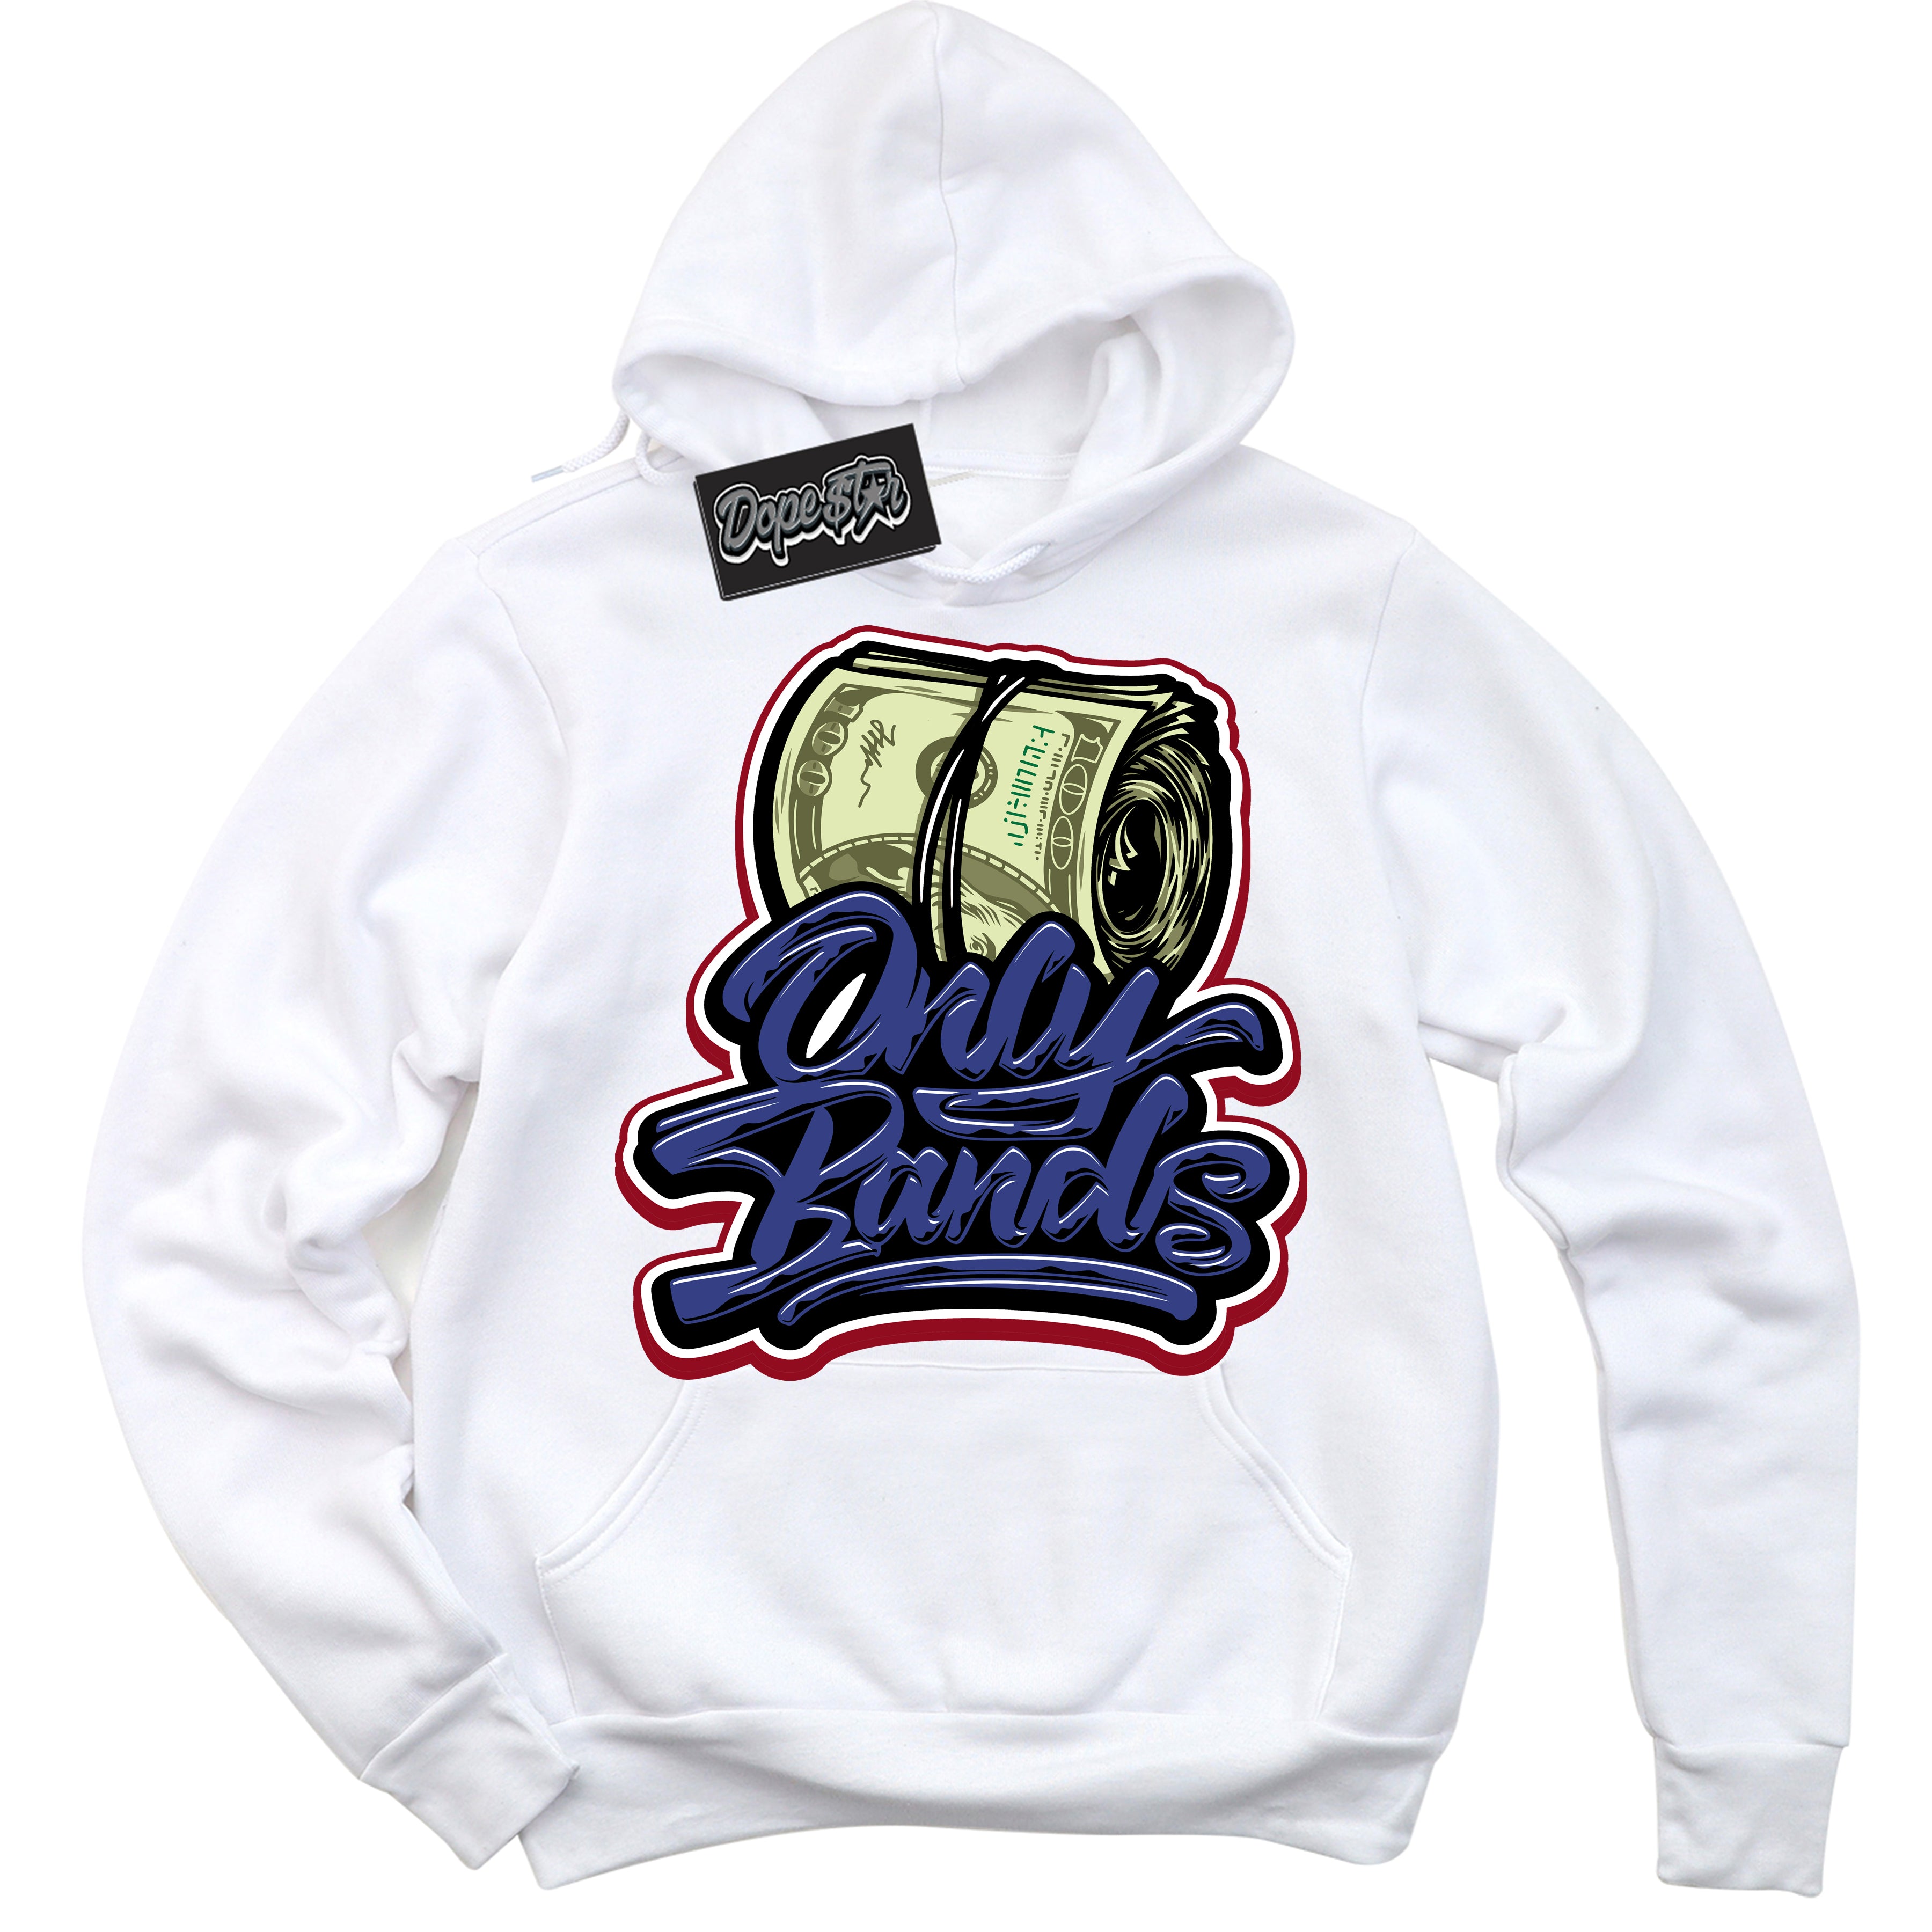 Cool White Hoodie with “ Only Bands ”  design that Perfectly Matches Playoffs 8s Sneakers.